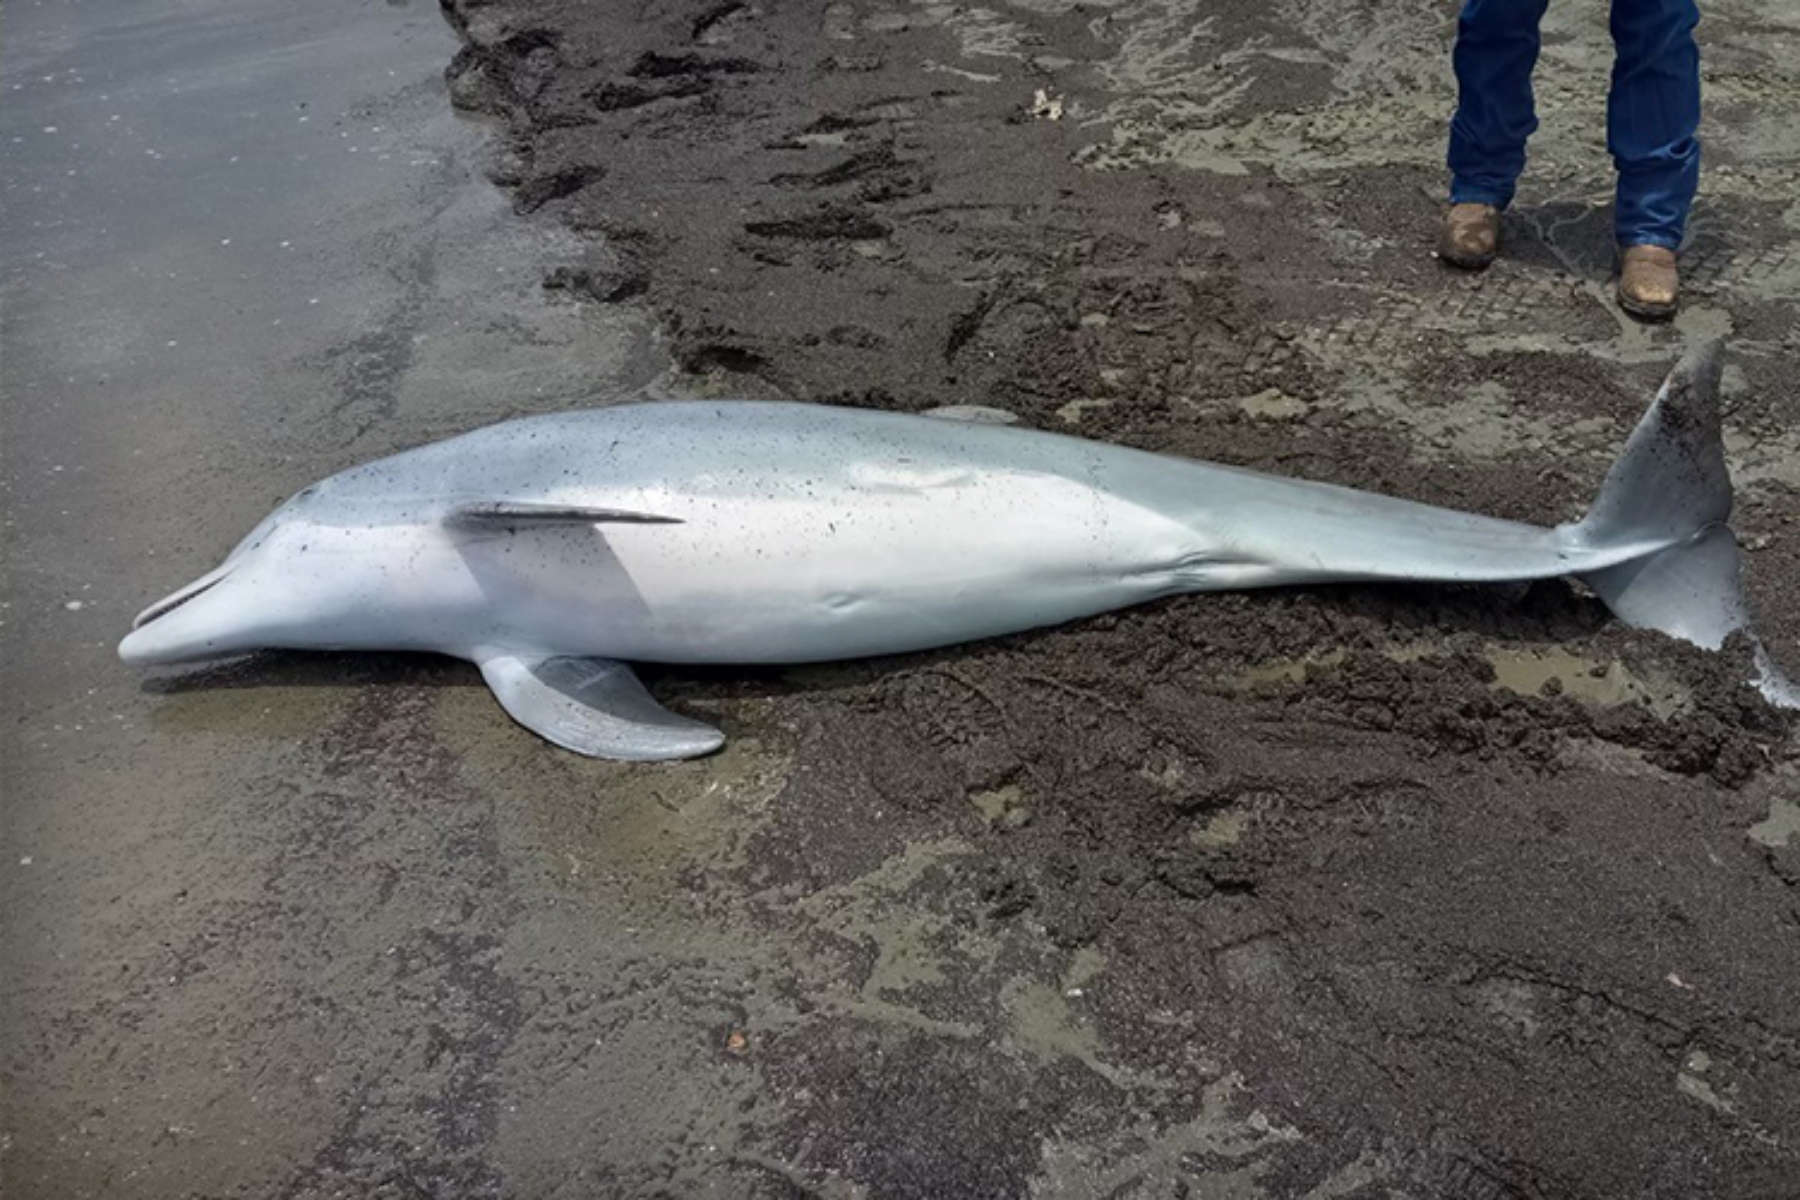 Dead Dolphin Discovered With Bullets 'Lodged' in Brain, Spinal Cord, Heart